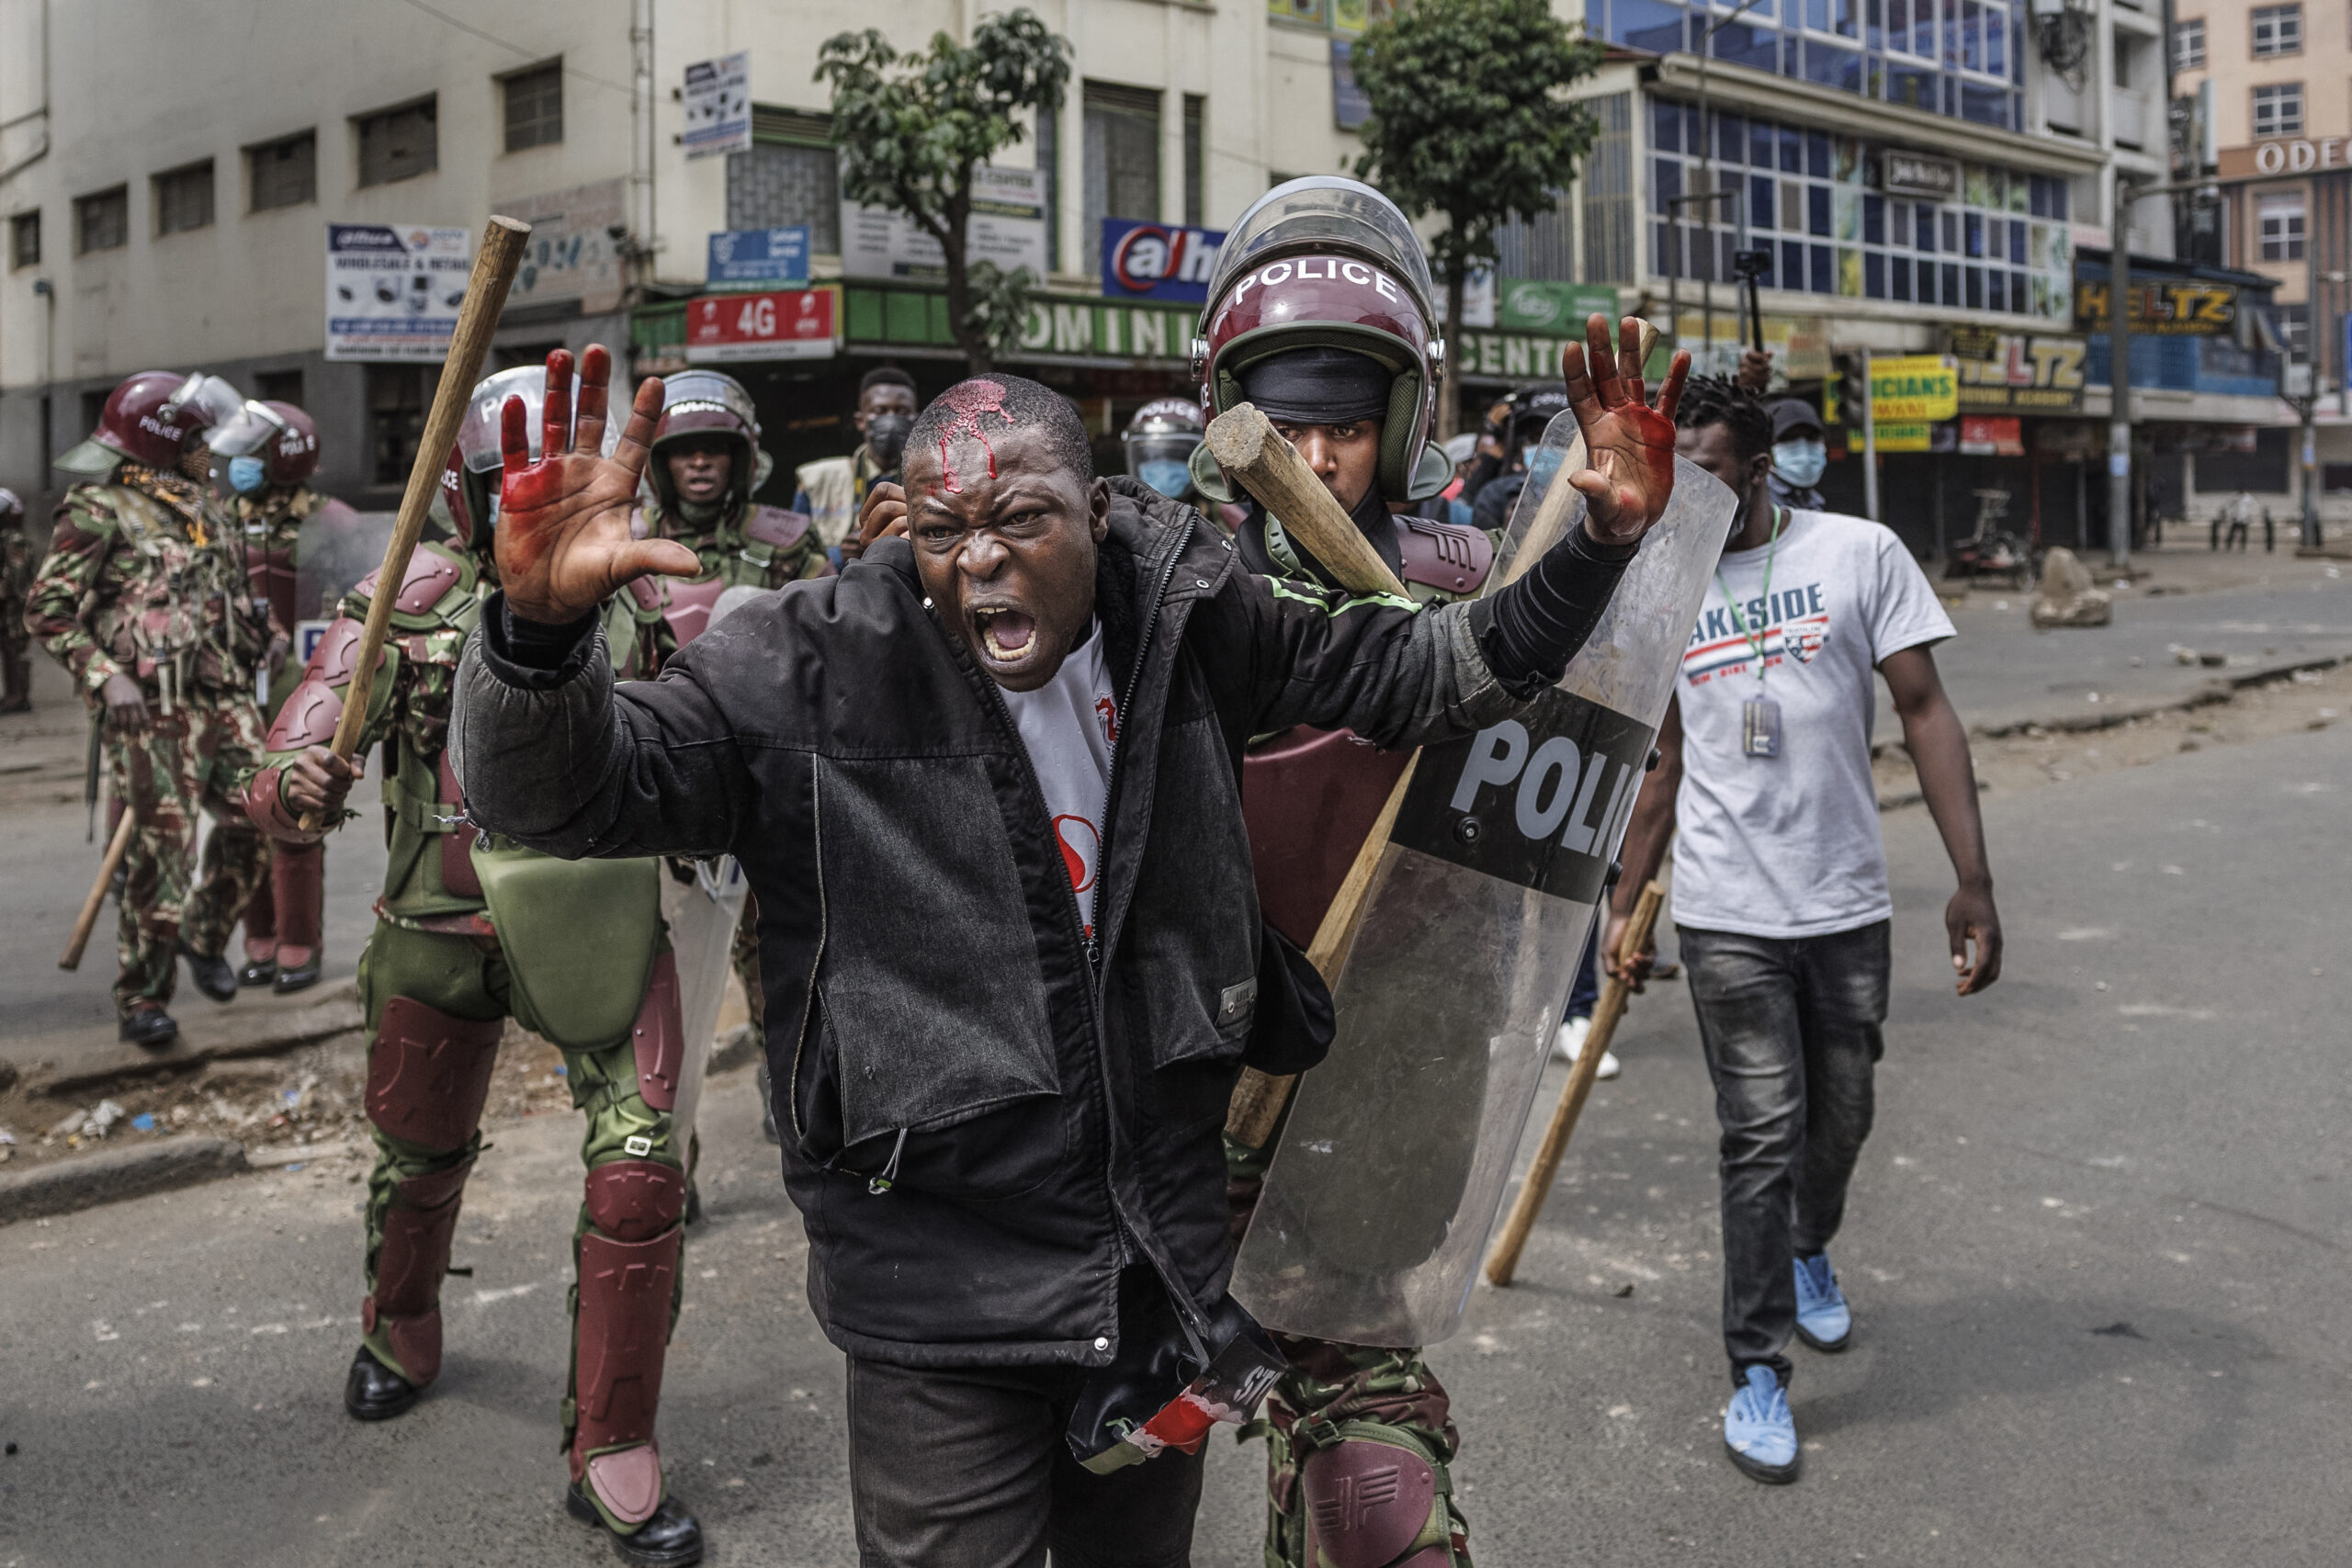 Kenyan government reviews public servant salaries after deadly protests